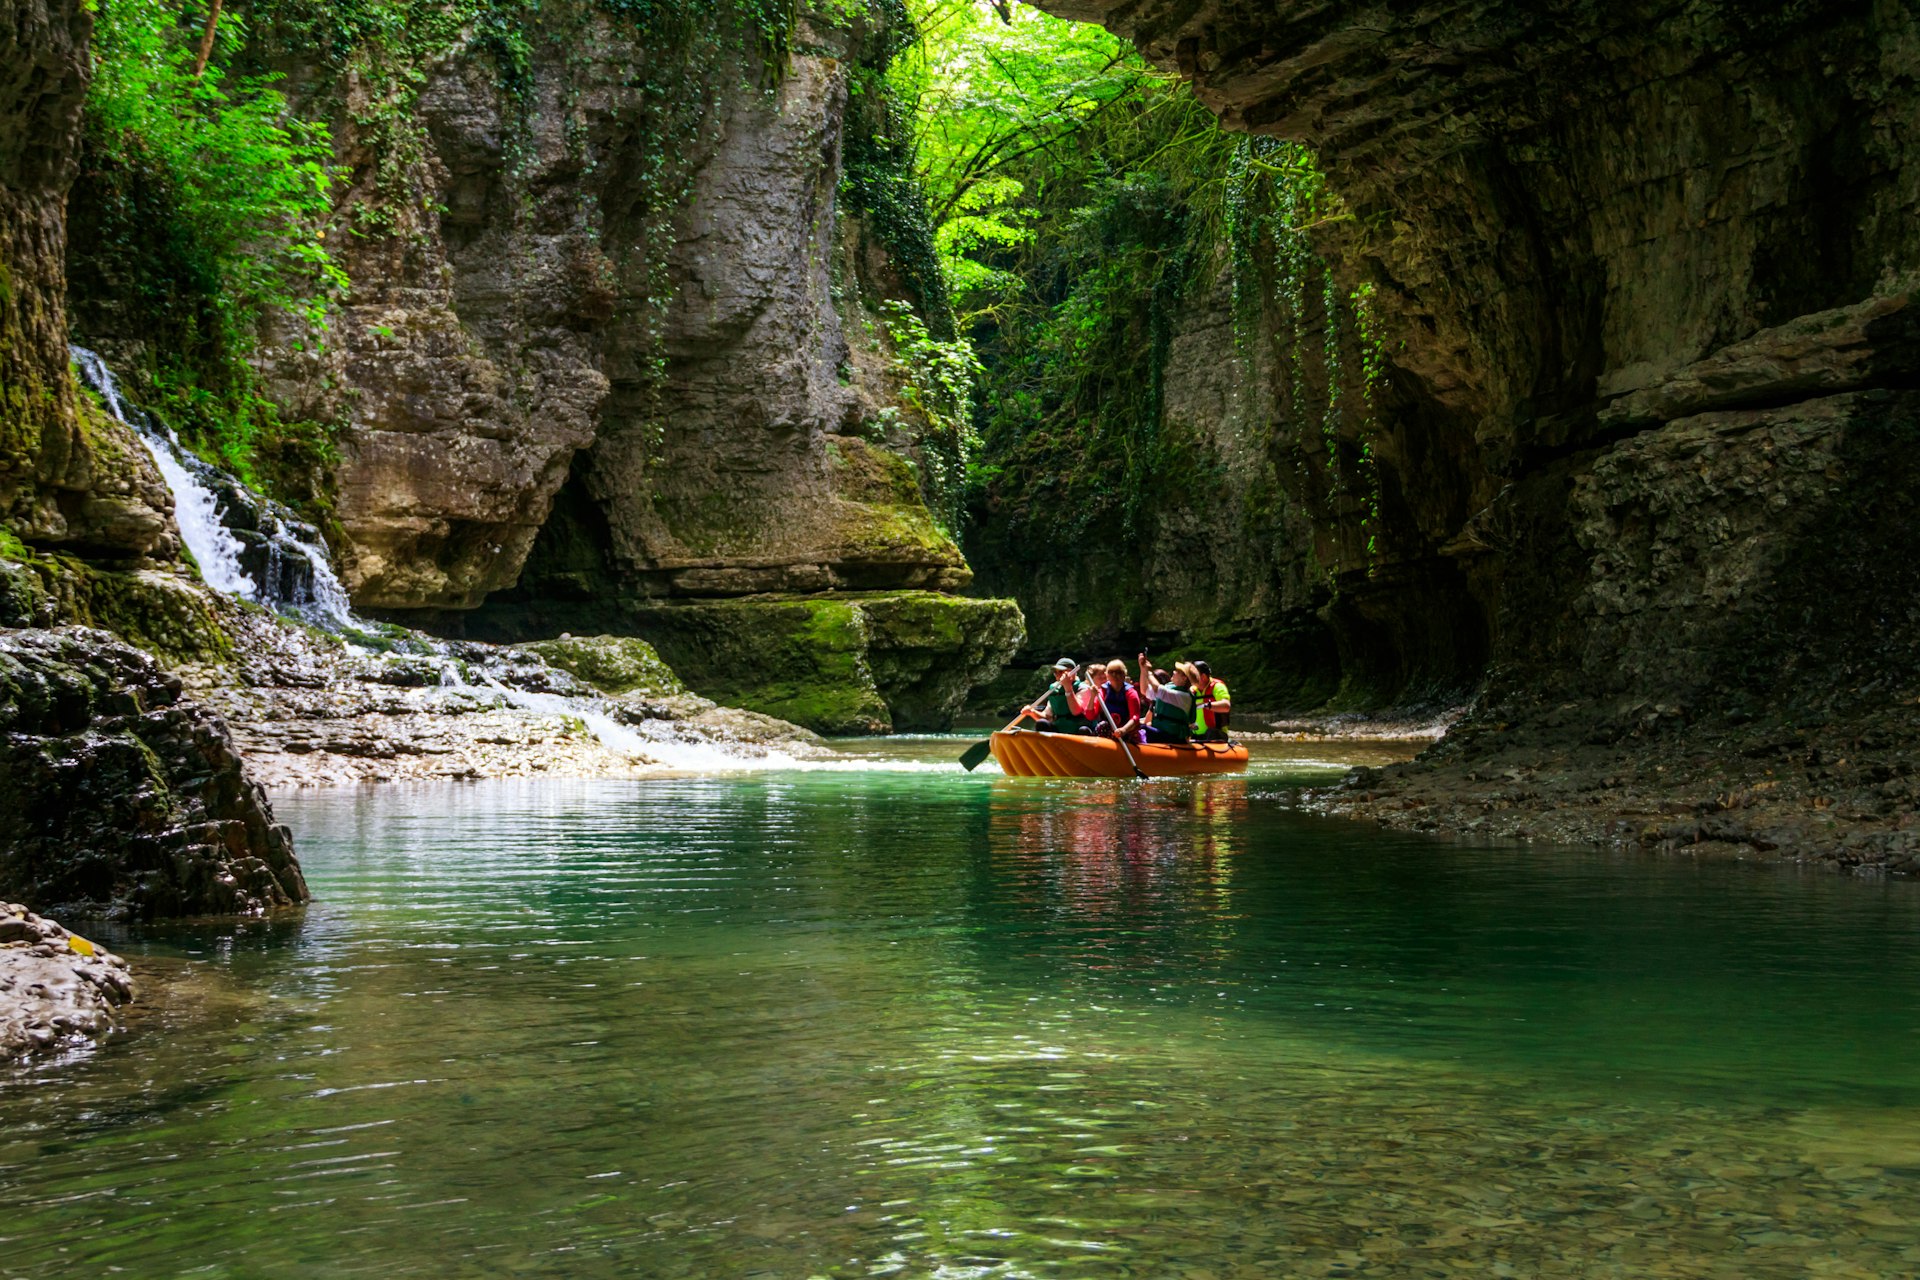 A group of people are paddling a raft along a blue-green river in a canyon